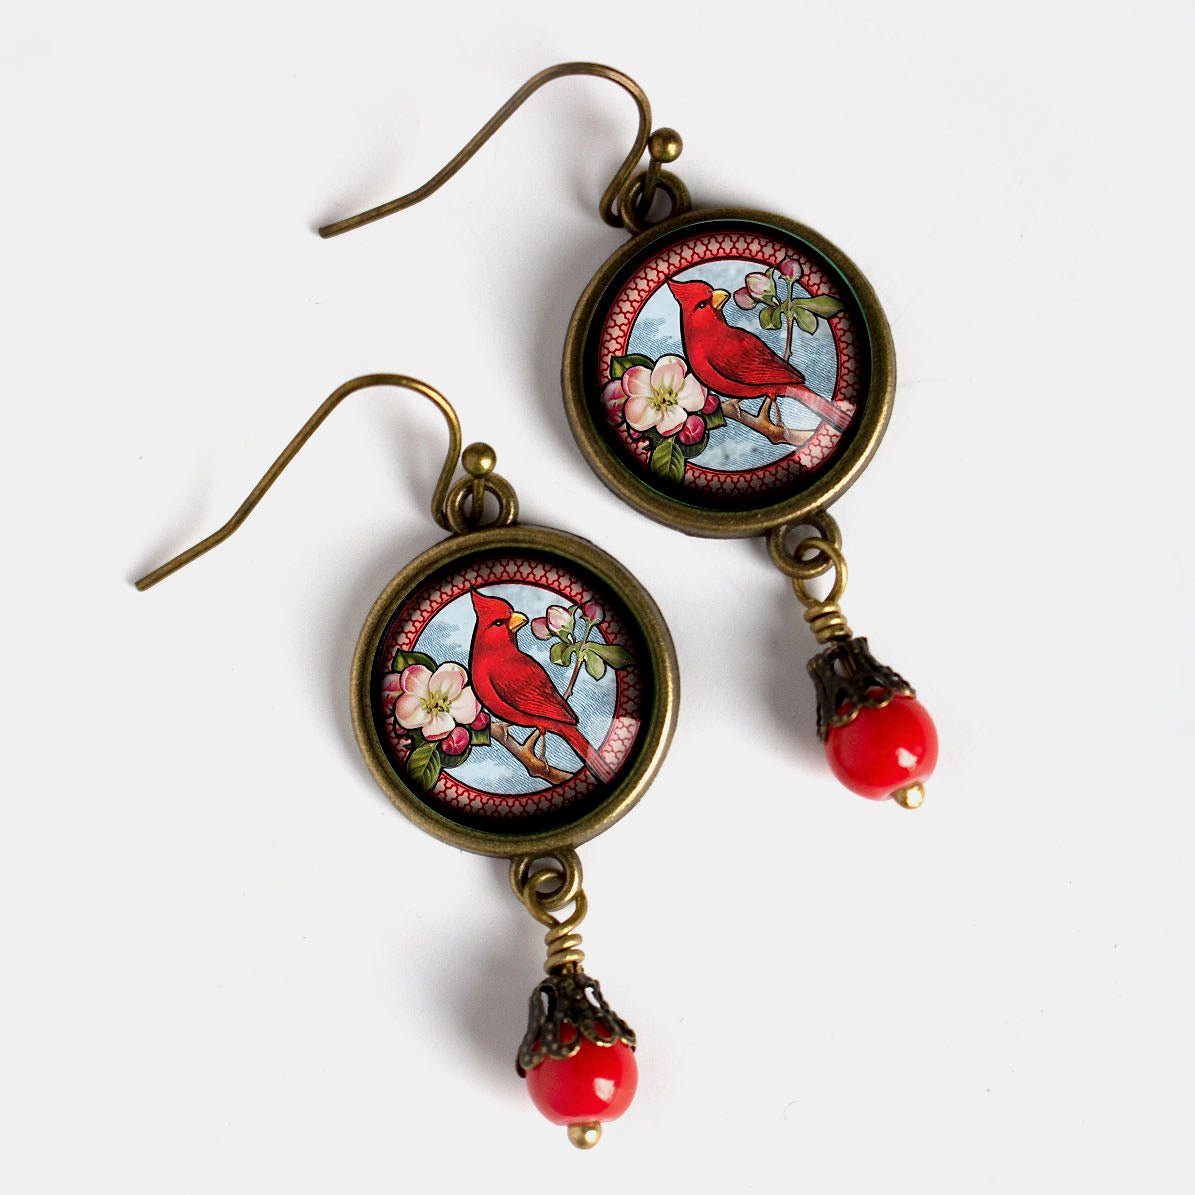 Vintage-inspired Red Cardinal Hand-made Cottage Core Earrings - Marmalade Mercantile